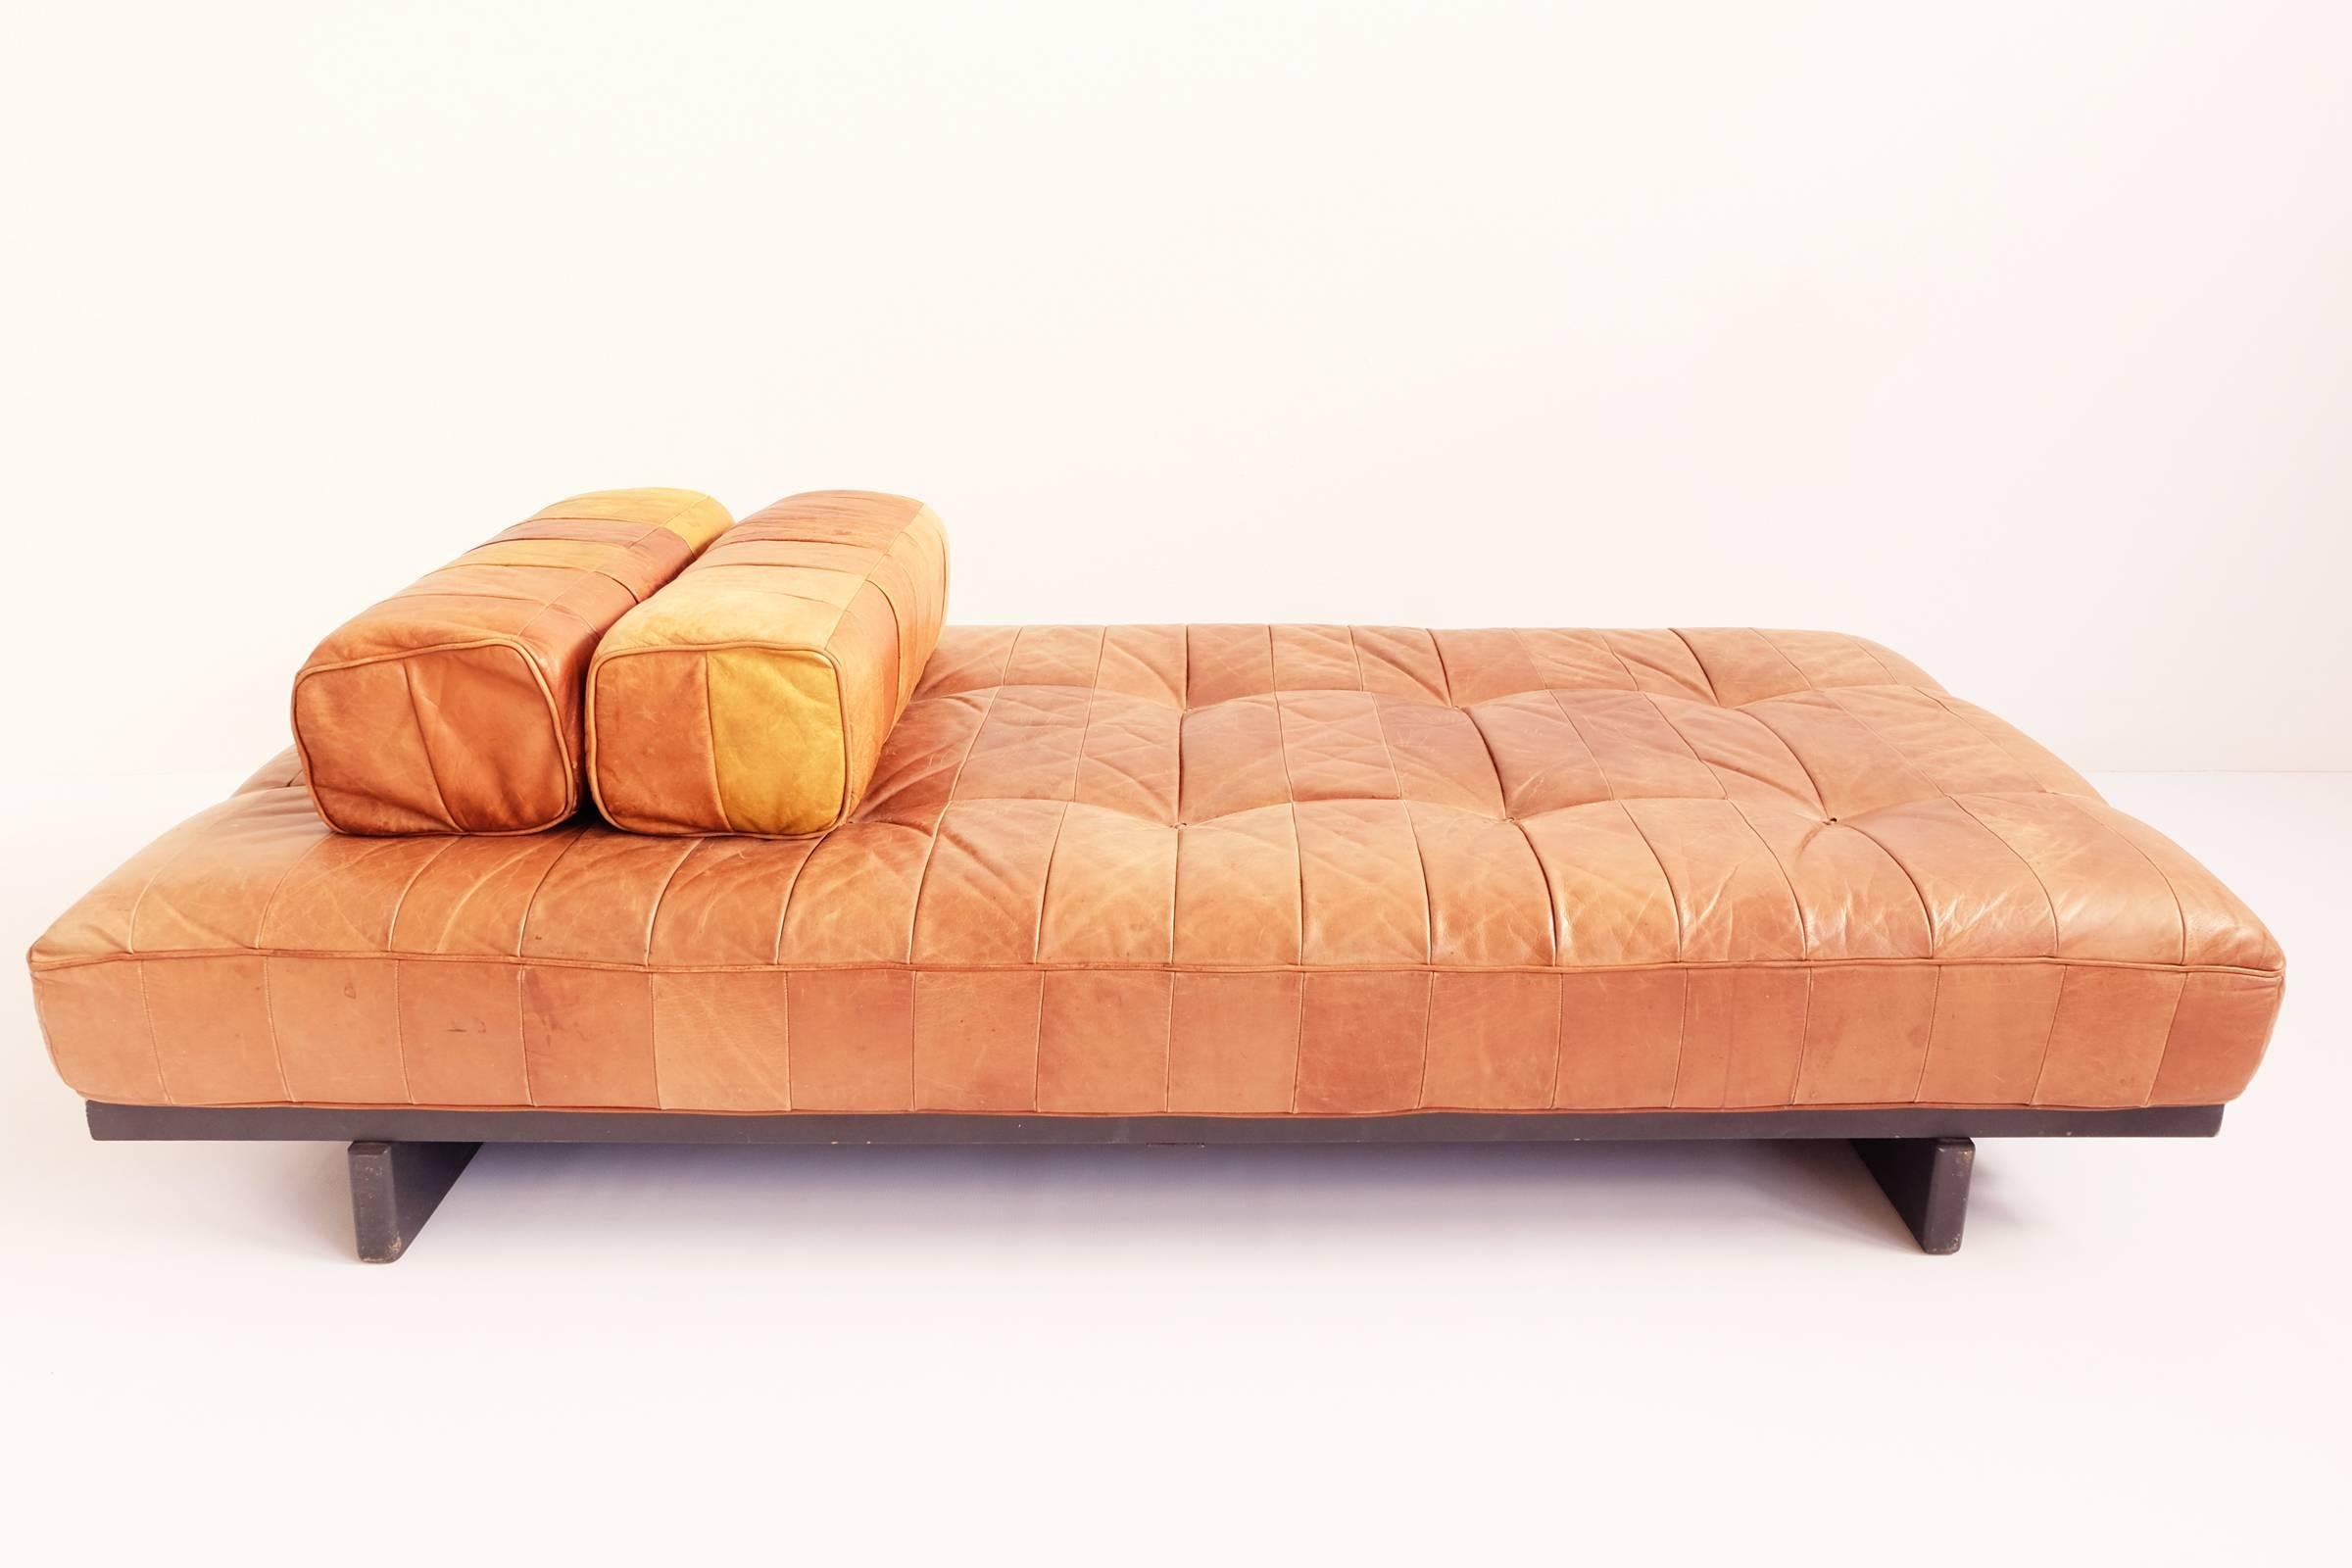 Iconic day bed with beautiful patina leather
It comes with two leather pillows.